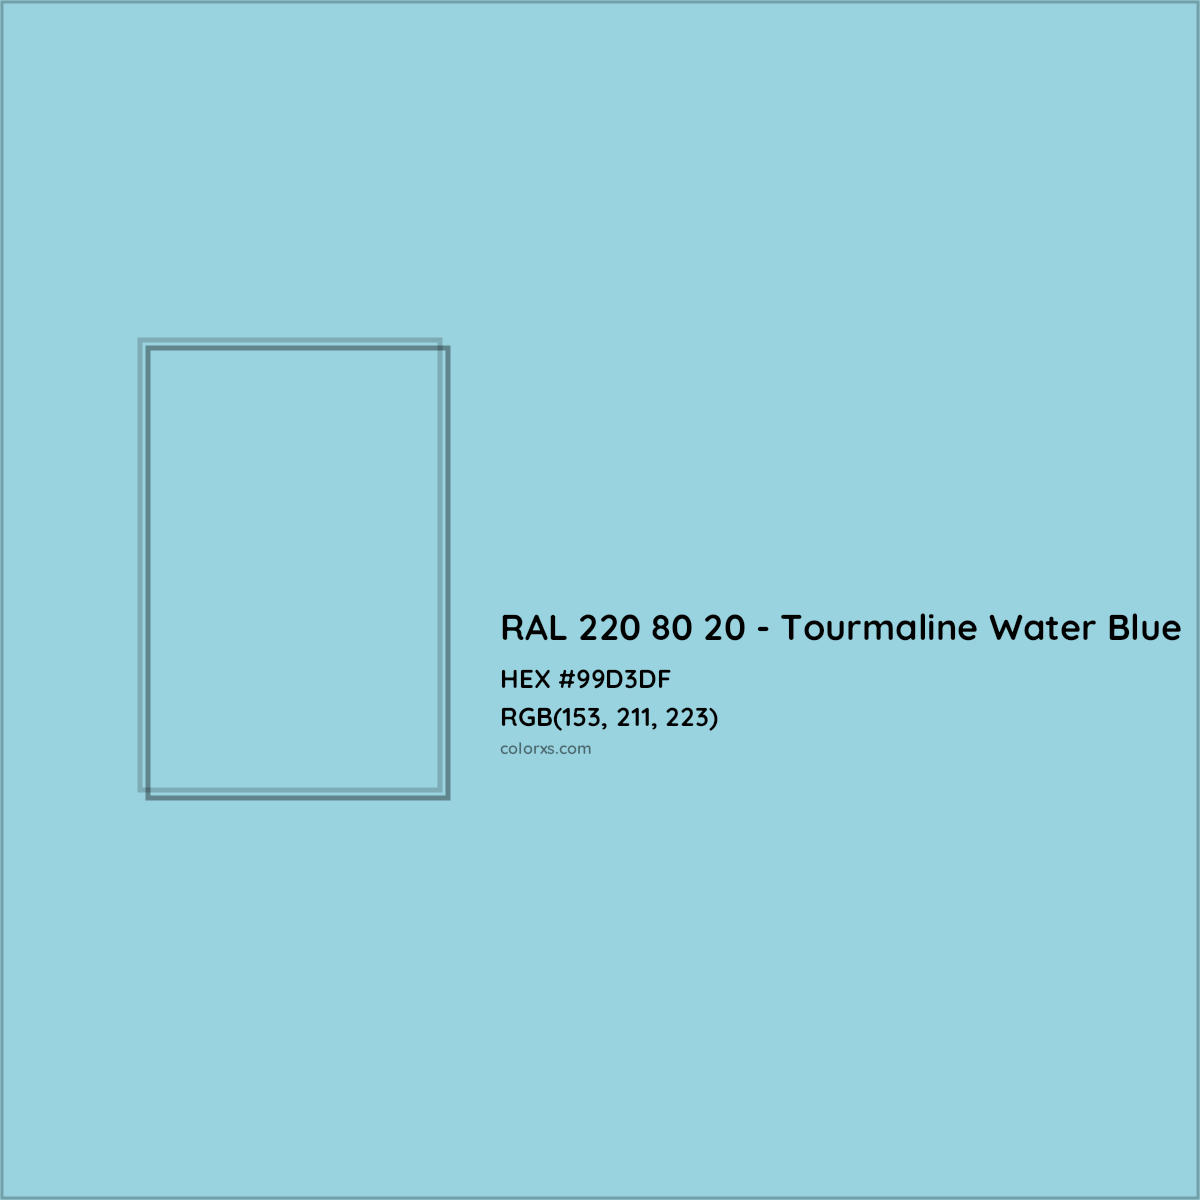 HEX #99D3DF RAL 220 80 20 - Tourmaline Water Blue CMS RAL Design - Color Code